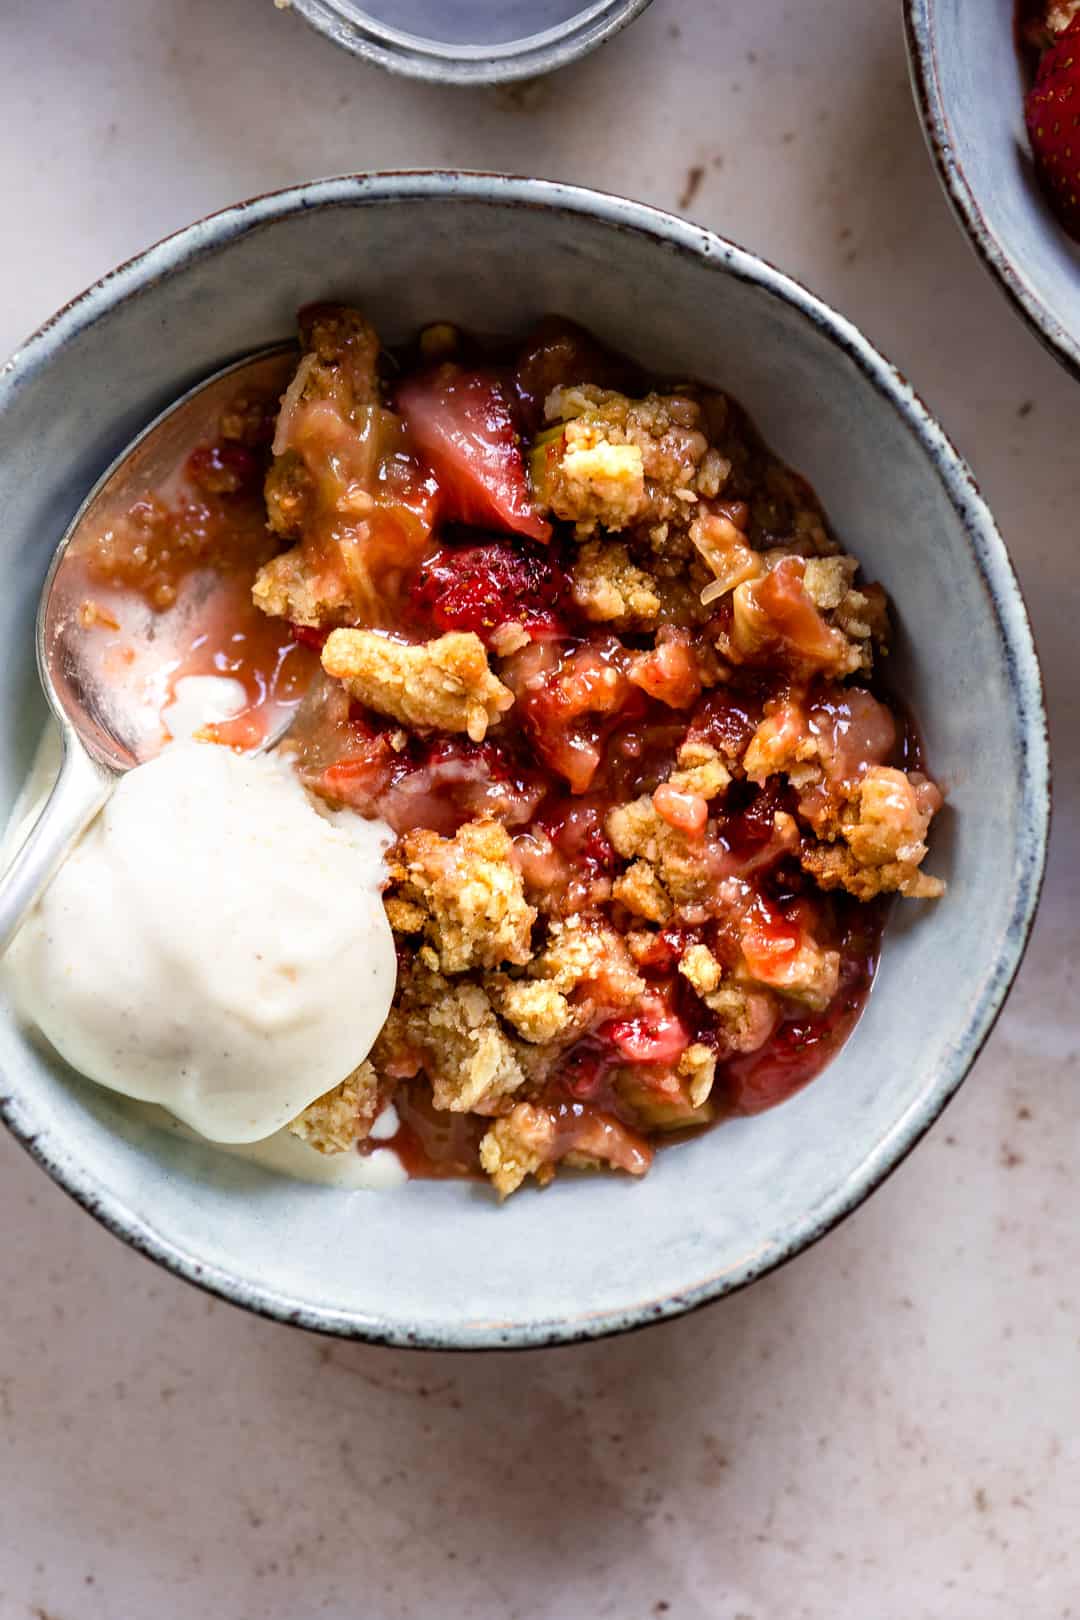 Rhubarb and strawberry crumble in a bowl with ice cream.